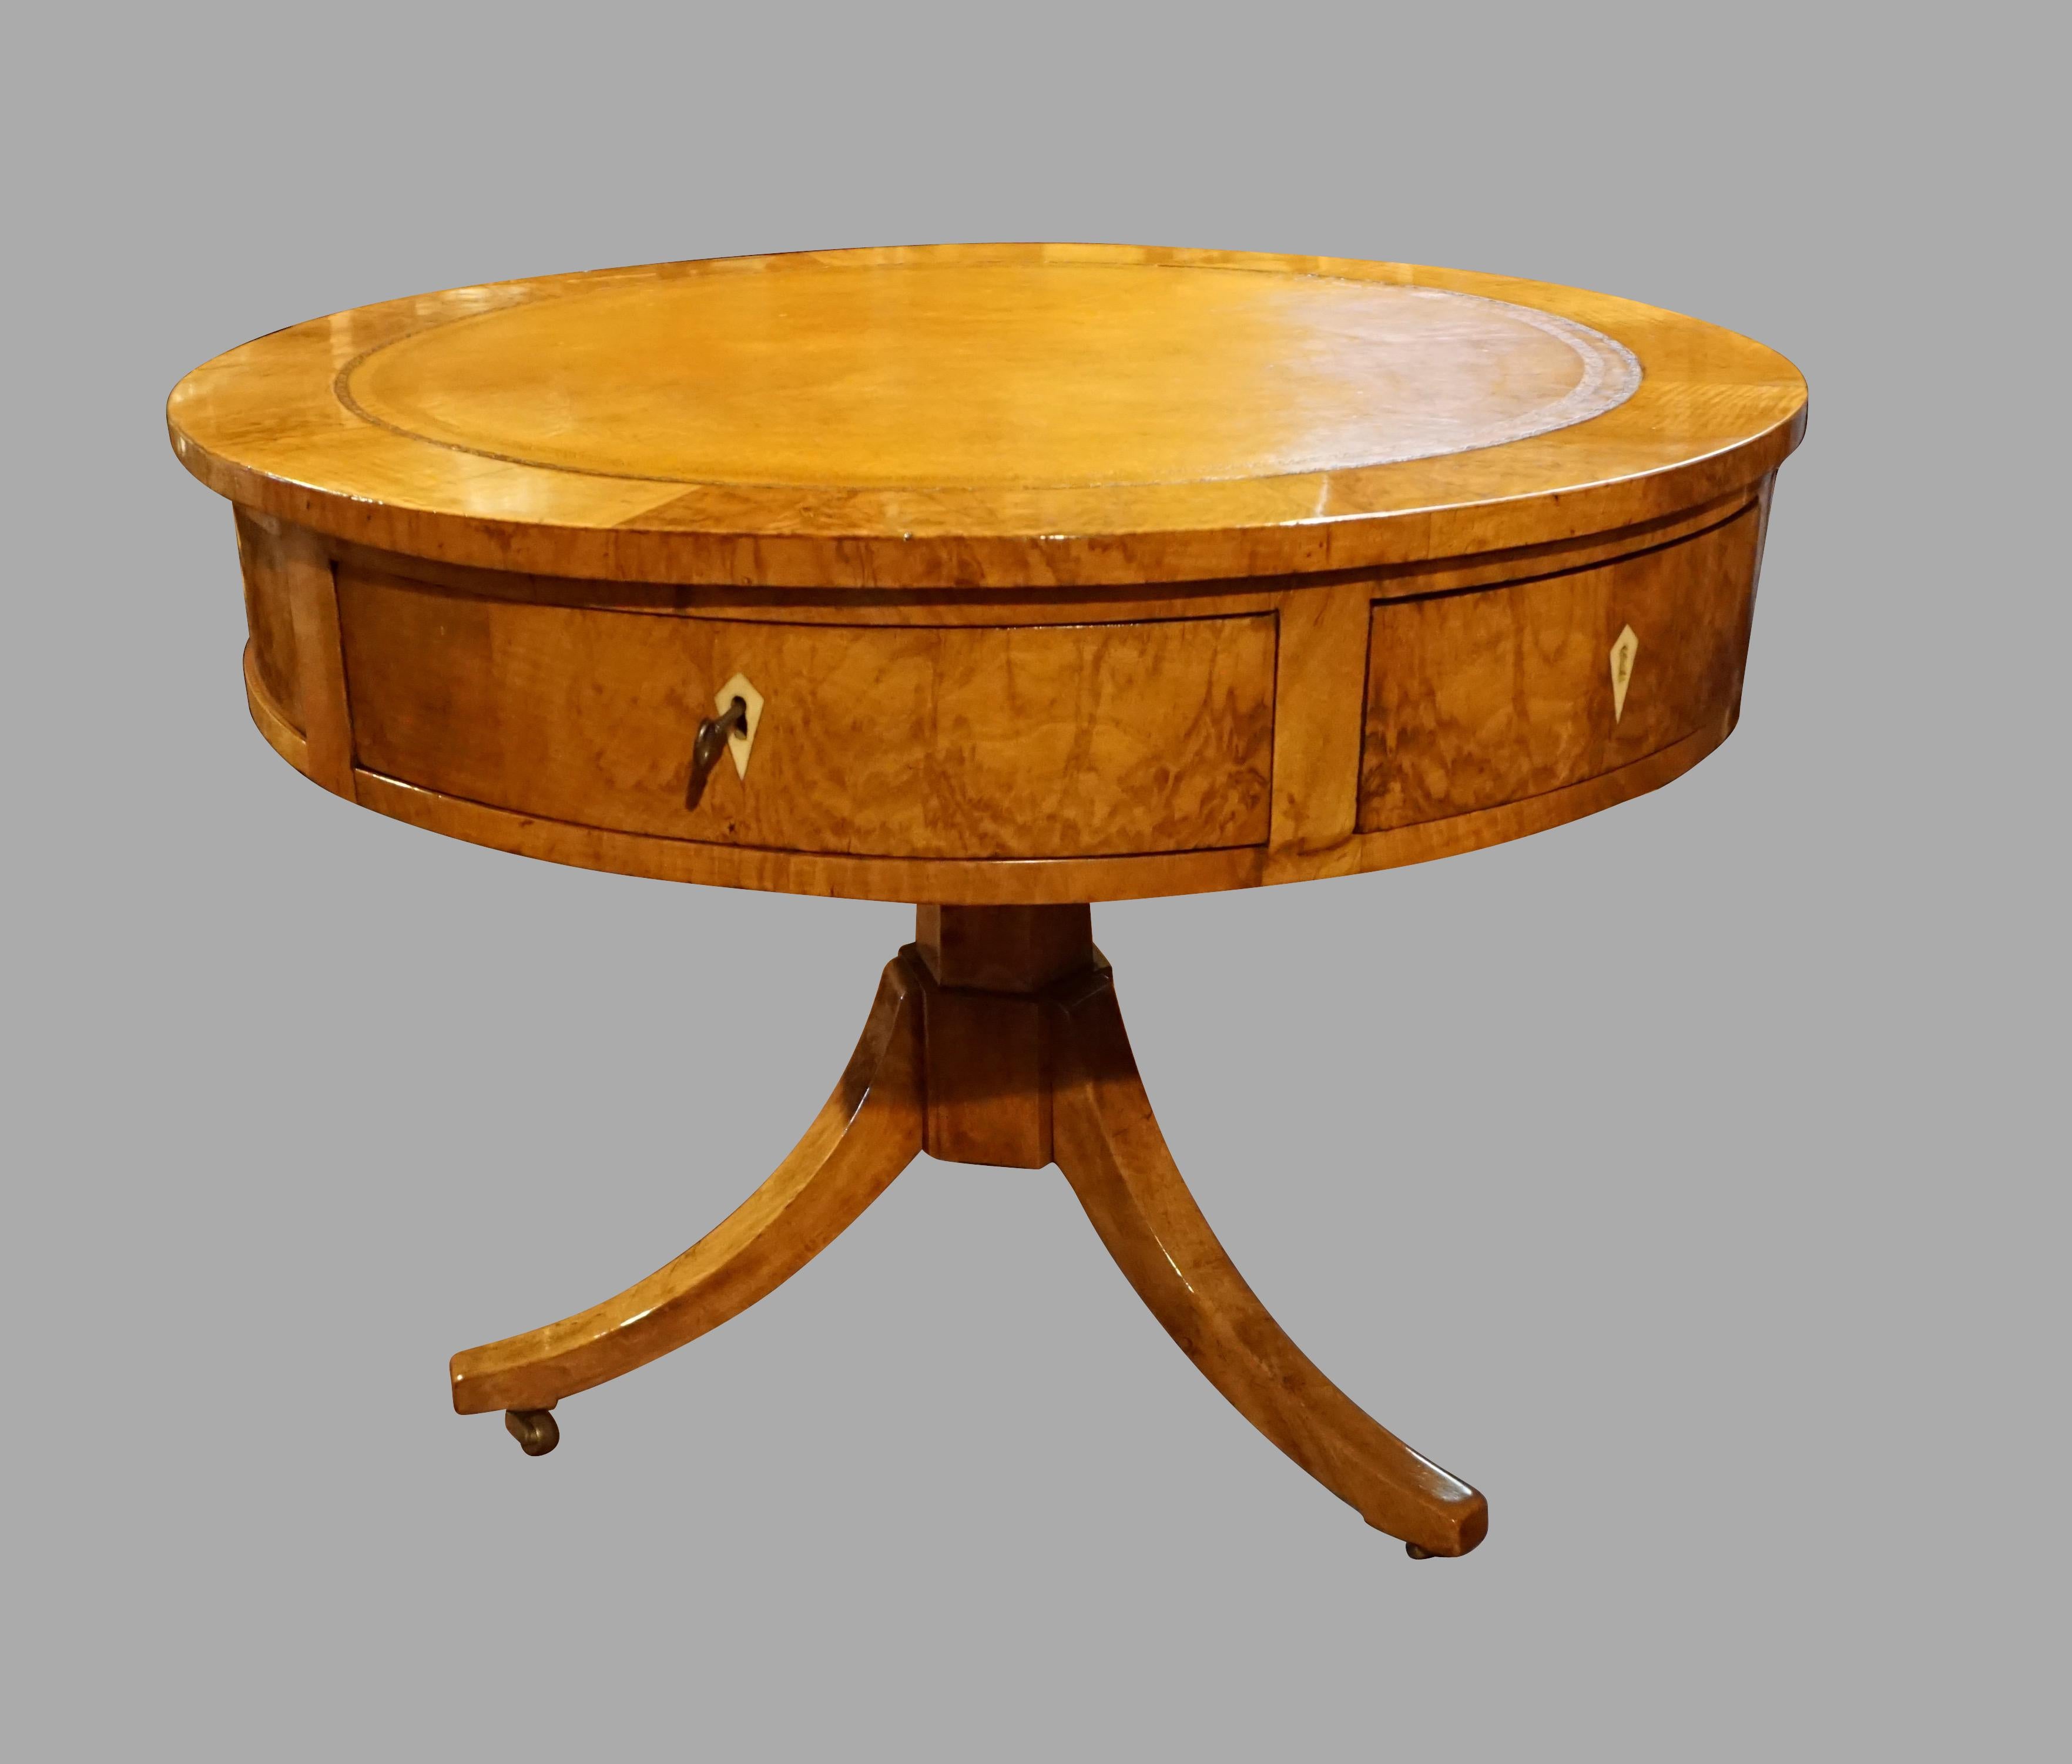 A handsome fruitwood Continental Biedermeier center table, the rotating tan gilt-tooled leather top above 2 rectangular drawers and 5 wedge shaped drawers, supported on a hexagonal tripod base ending in brass casters. Probably Austrian or Northern